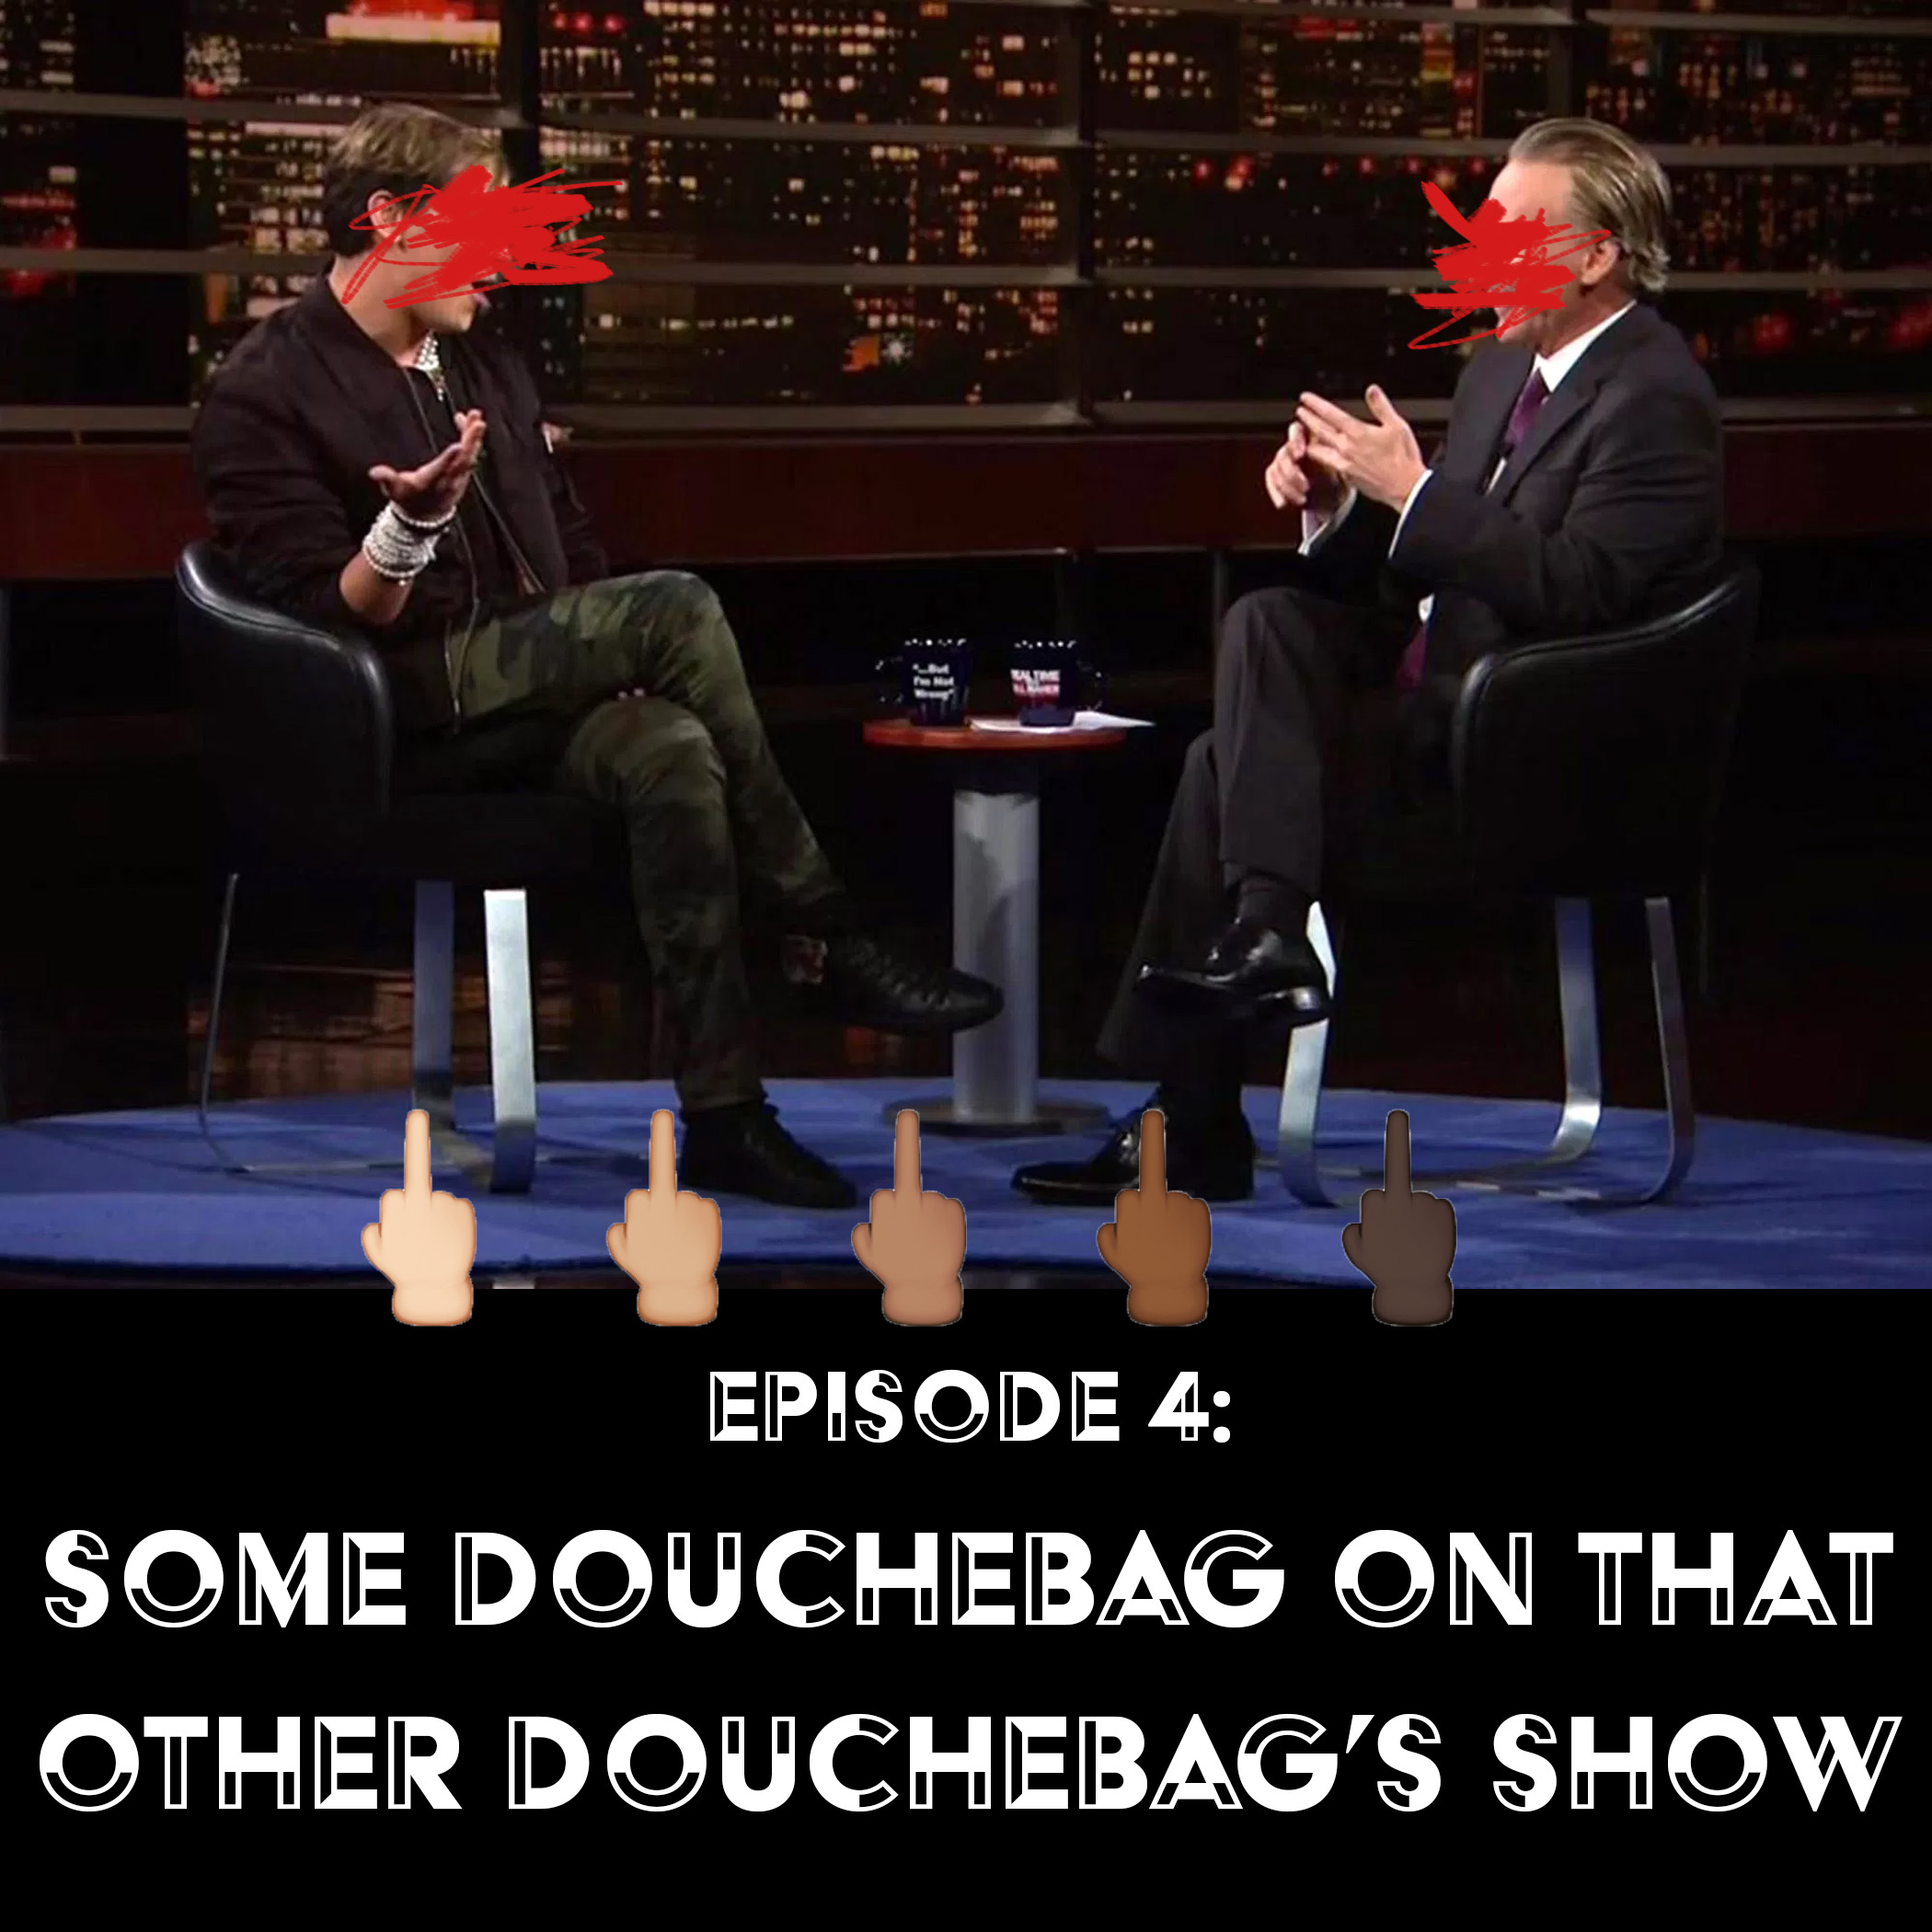 Episode 4: Some Douchebag on That Other Douchebag’s Show